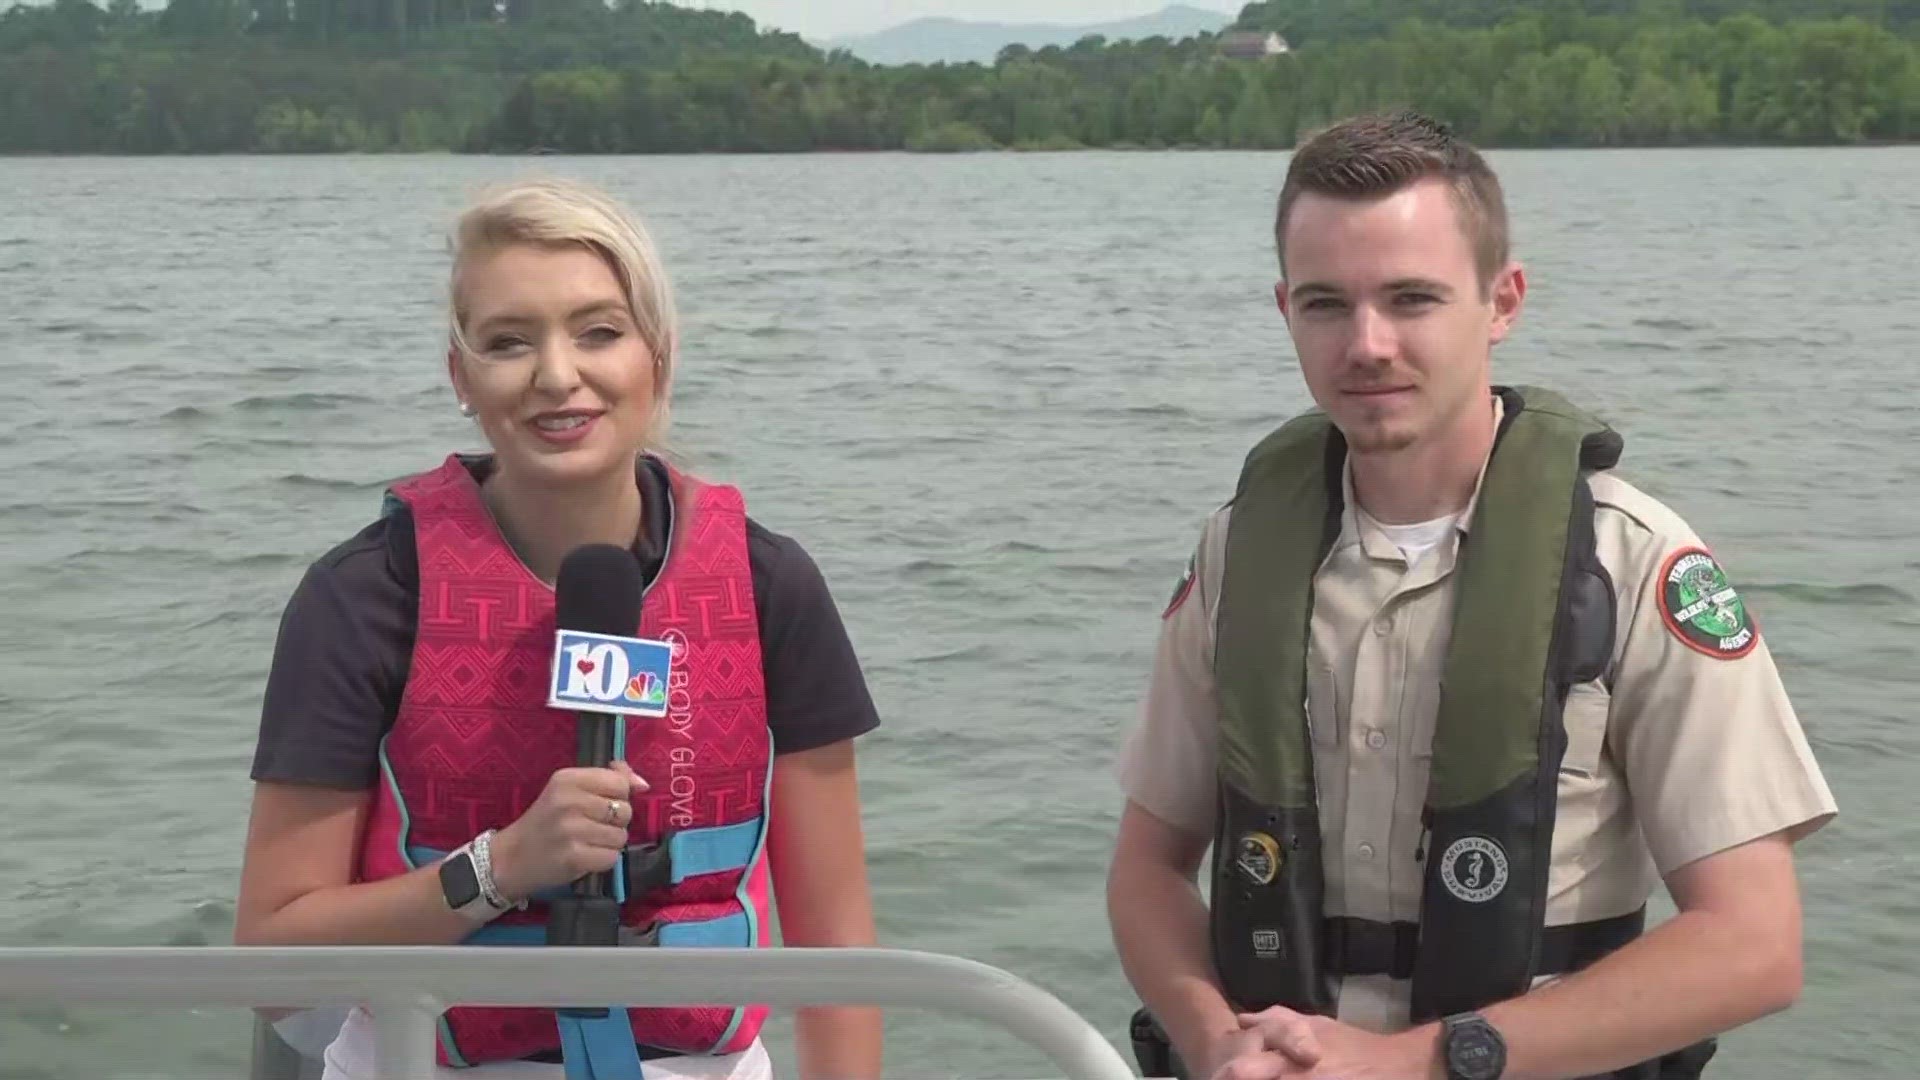 Plenty of people will be out on the water for Memorial Day. That's why TWRA is stressing the importance of staying safe.